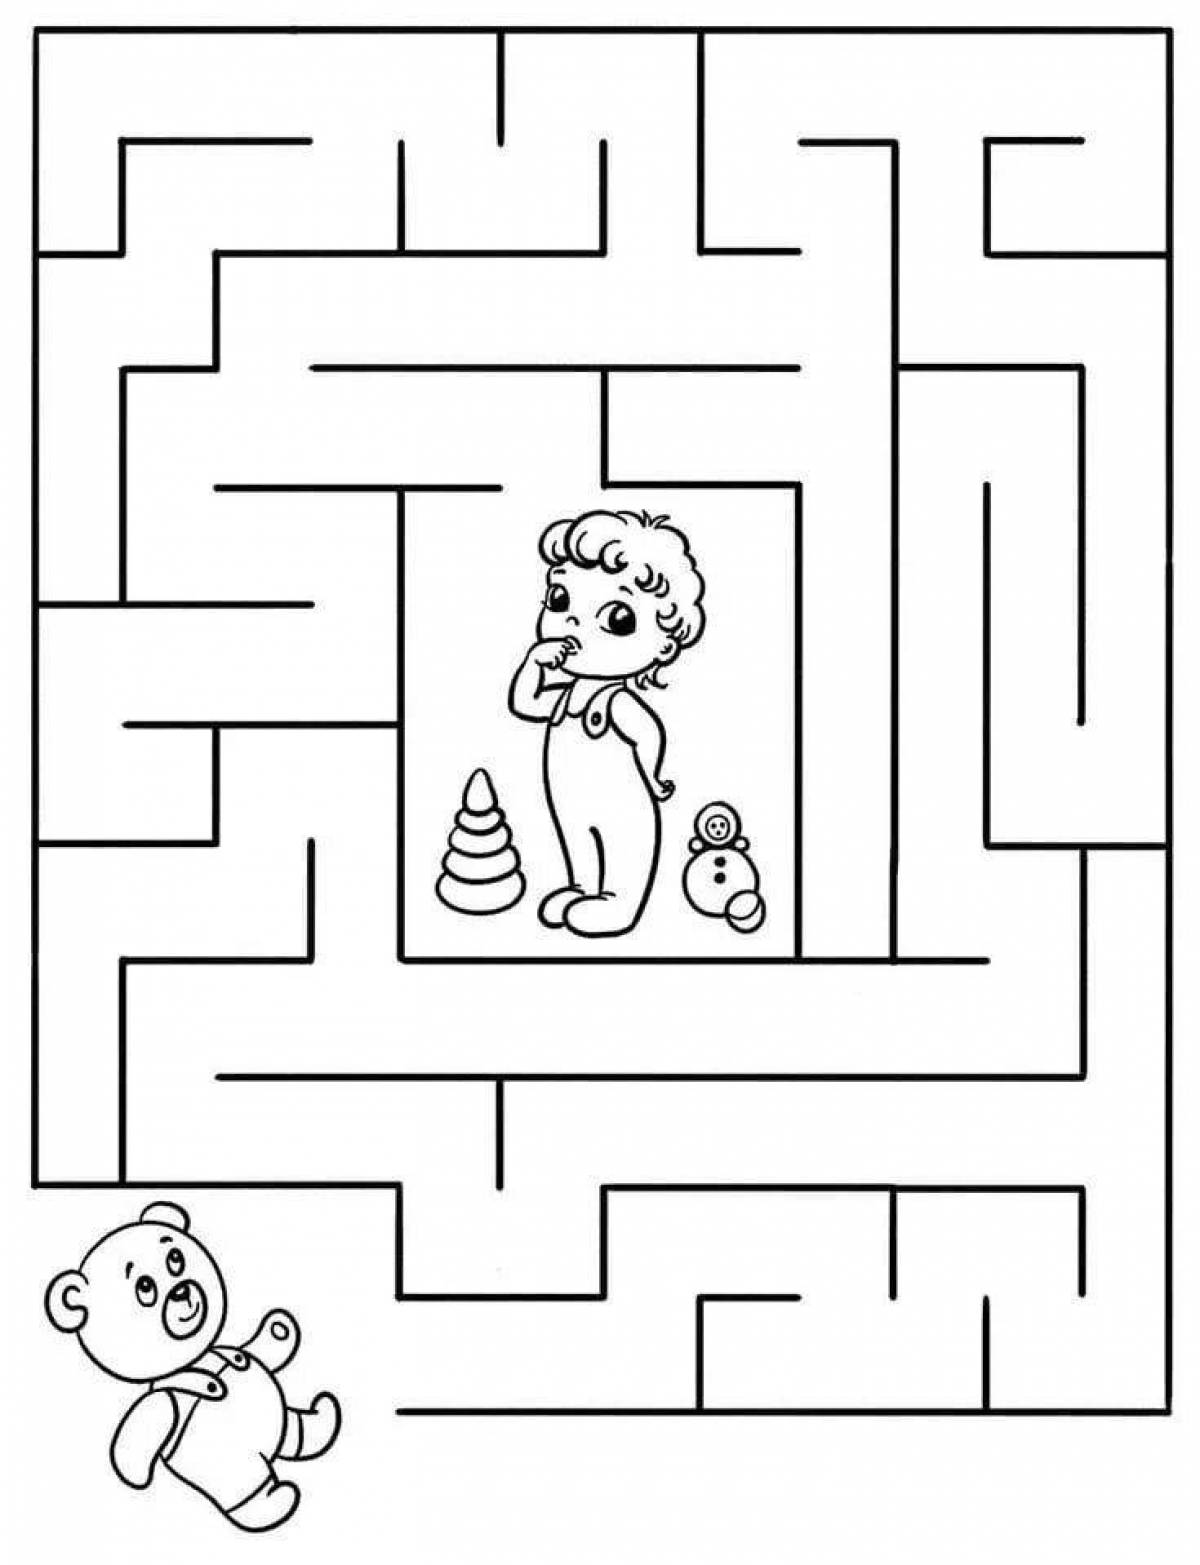 Exciting maze coloring book for kids 5-6 years old